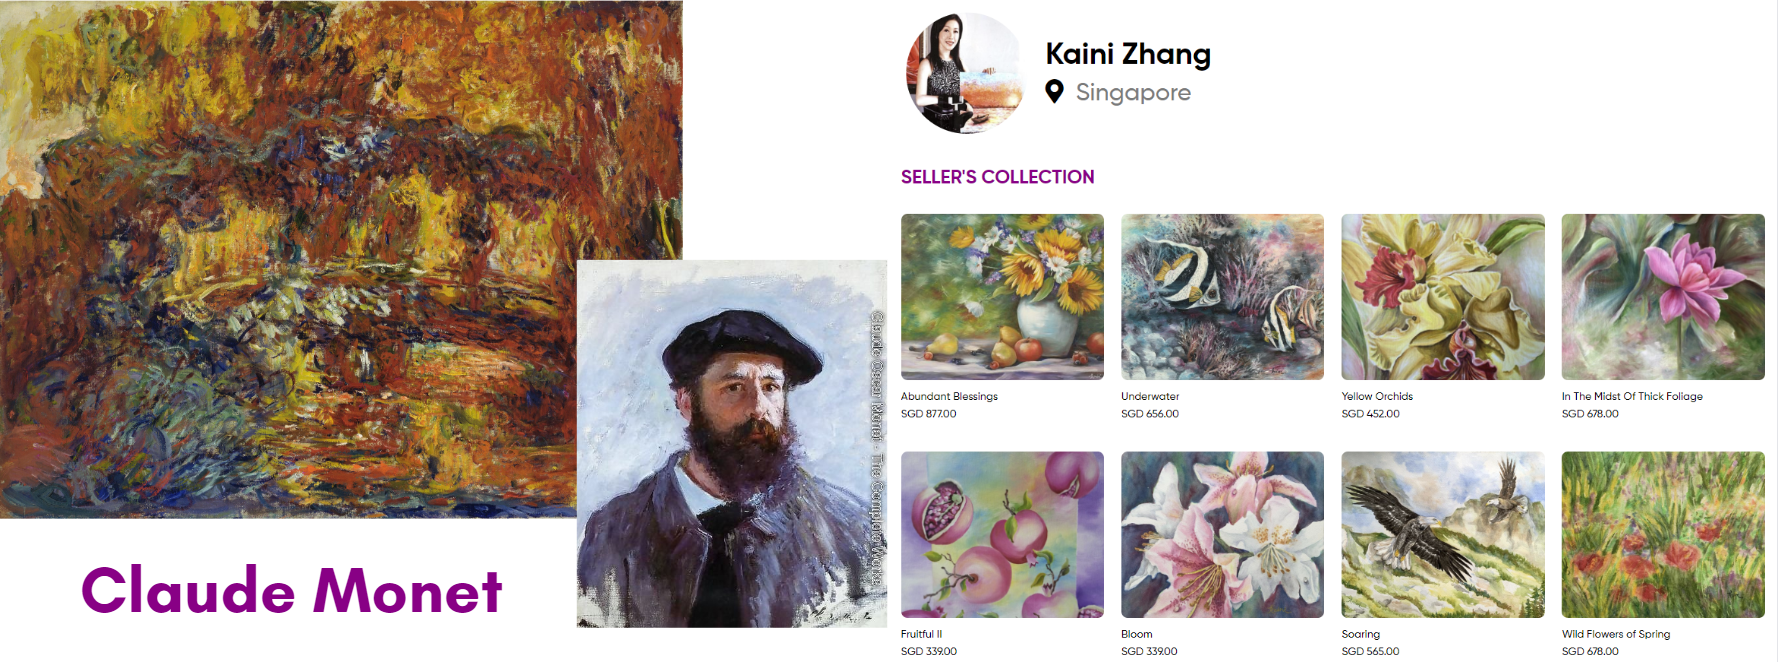 Brushes of Resilience: Claude Monet and Zhang Kaini